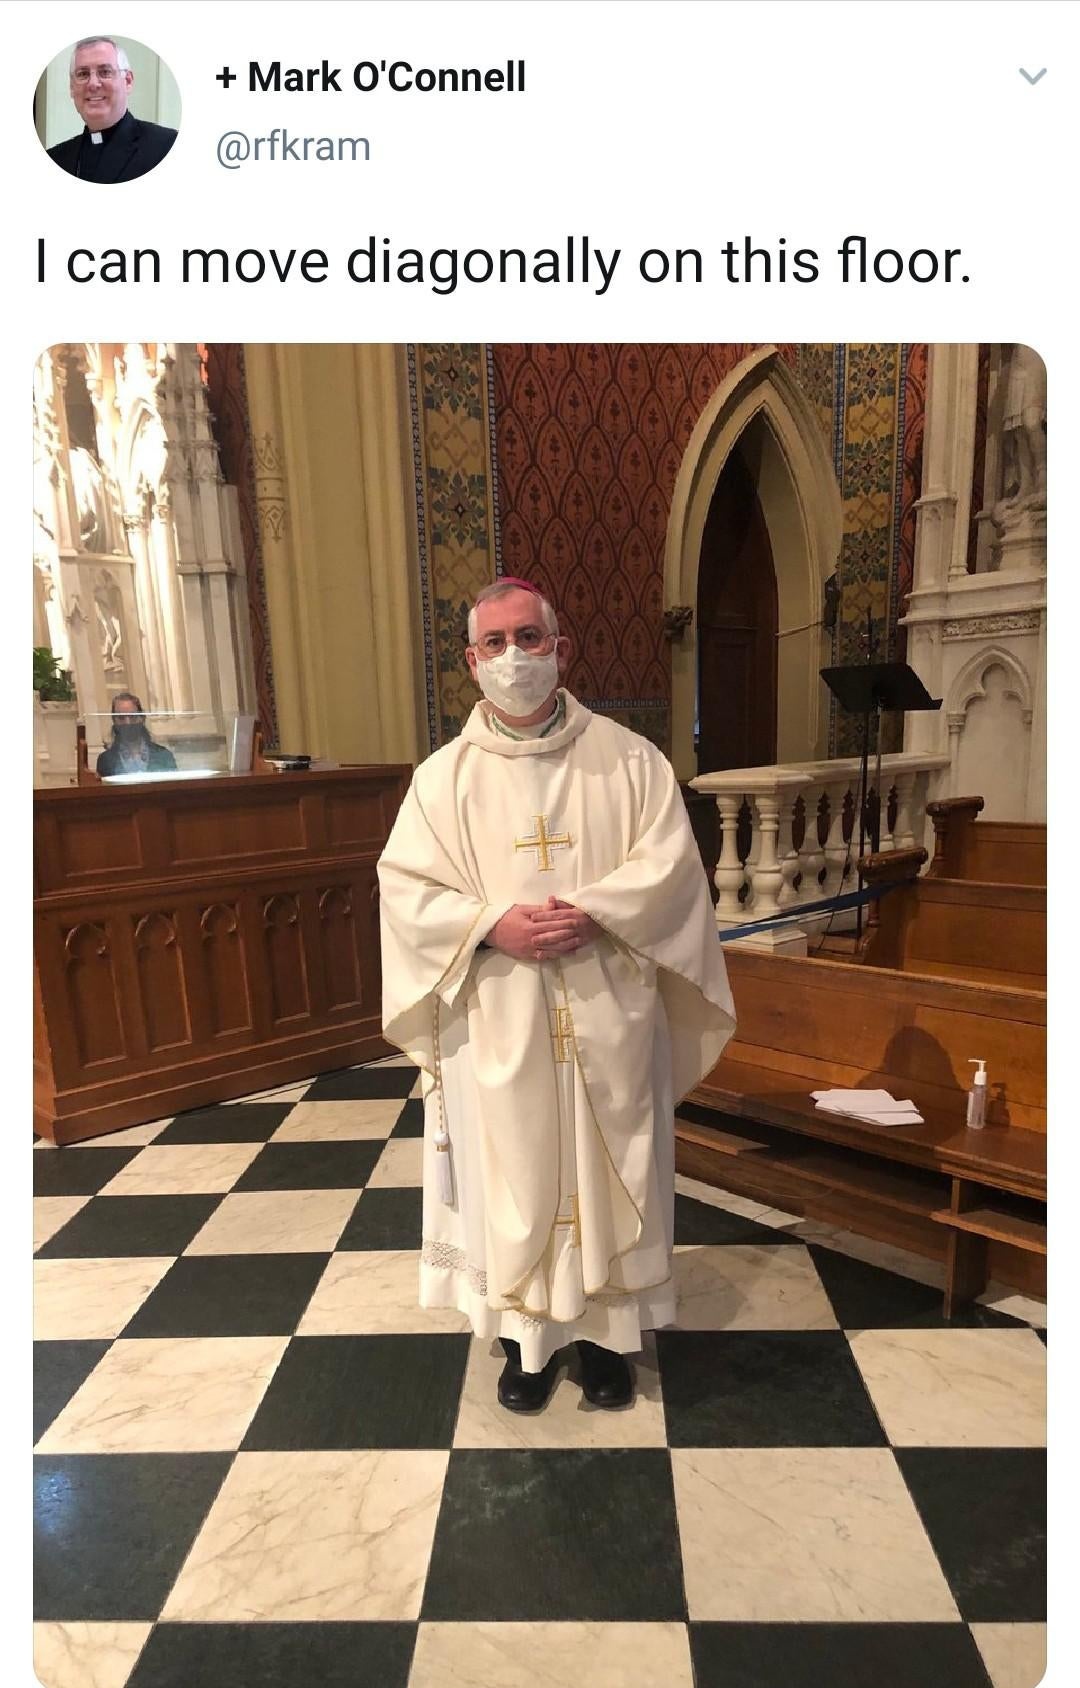 a tweet by a priest named Mark O'Connell that says "I can move diagonally on this floor." and a picture of him with him standing on a floor that looks like a chess board.